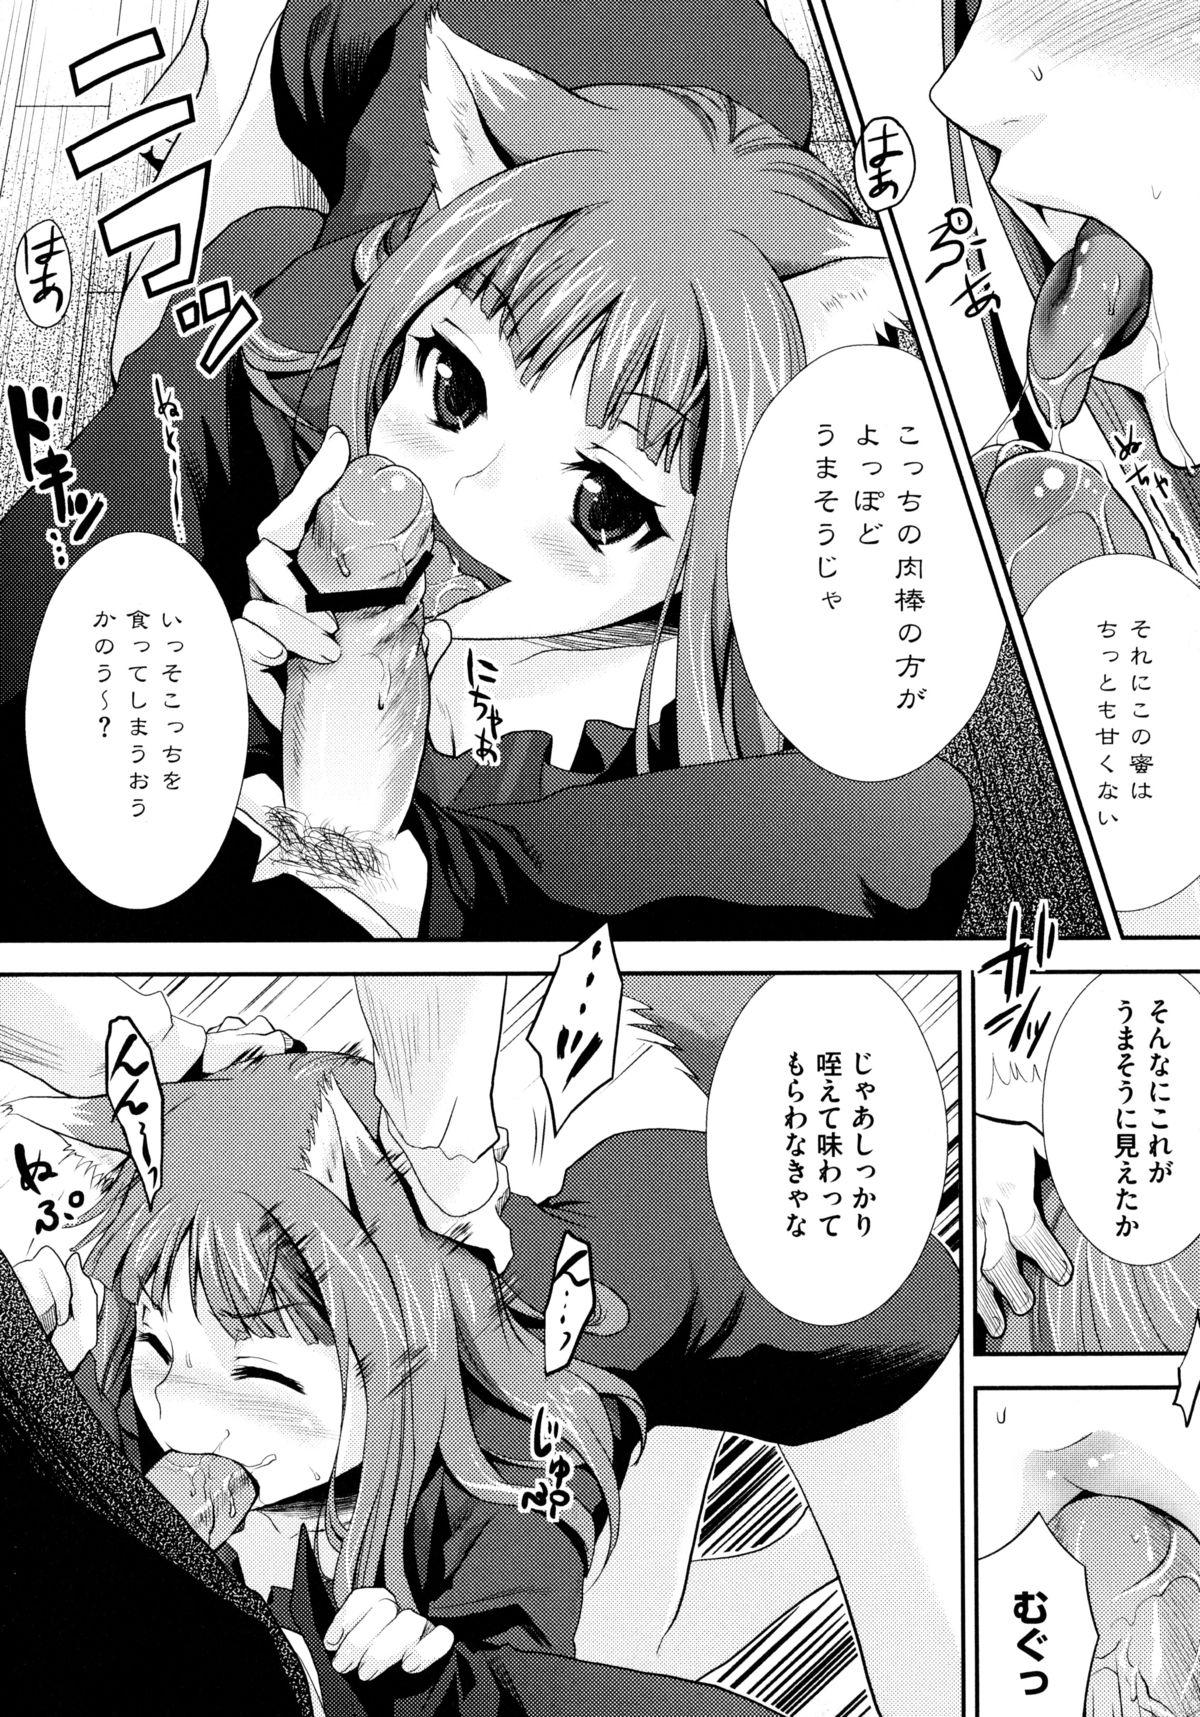 Retro Ookami Musume to Inkou no Tabi - Spice and wolf Livesex - Page 10